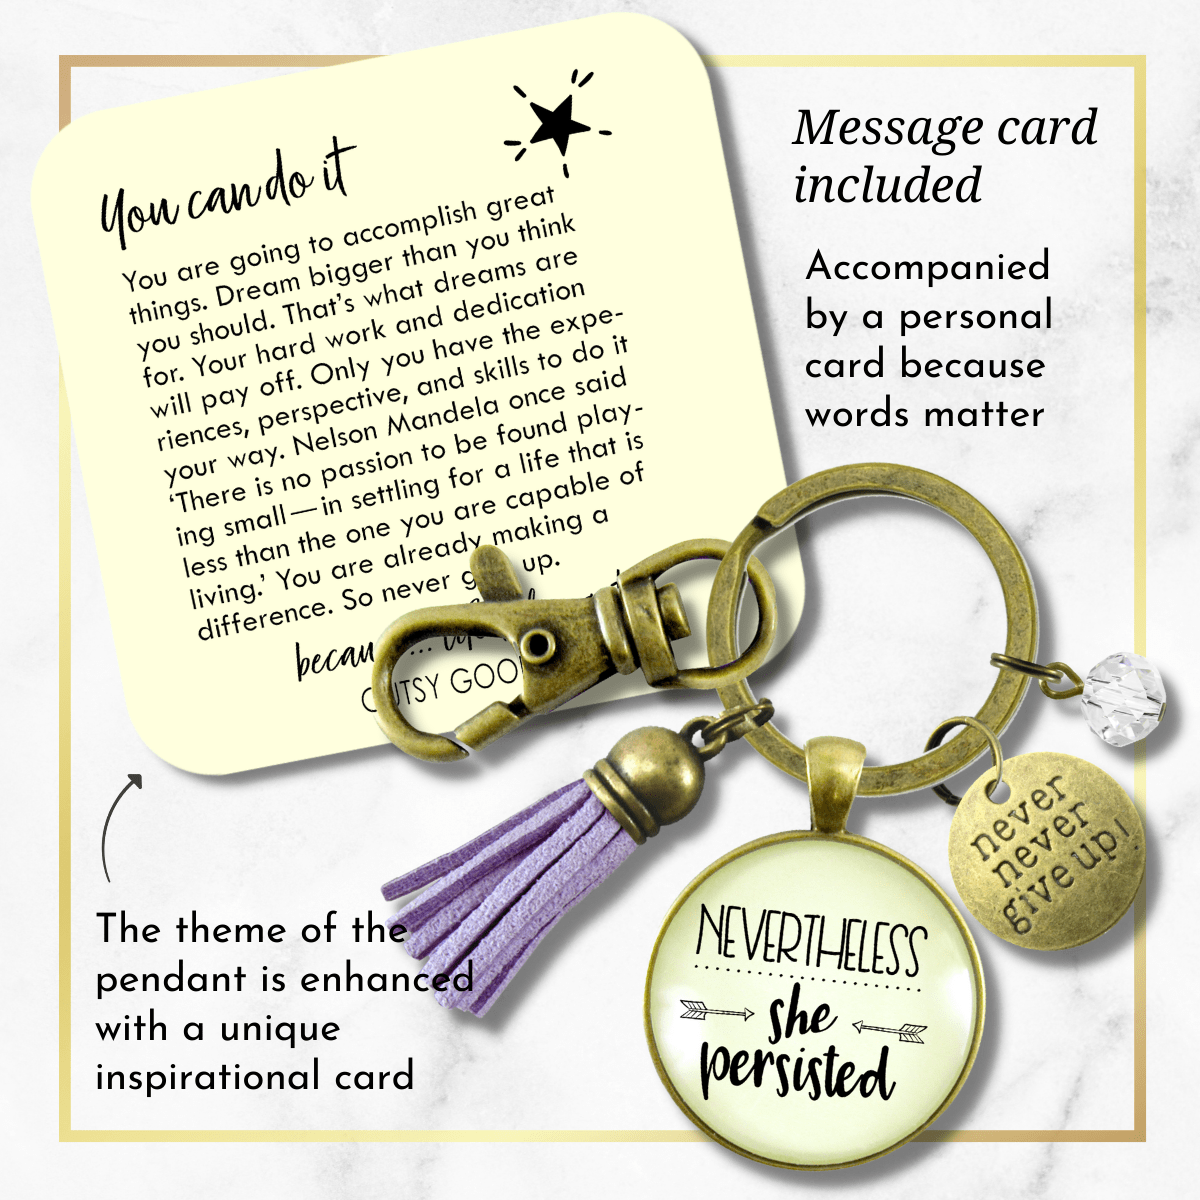 Nevertheless She Persisted Keychain Glam Success Quote Hustle Jewelry Gift Tassel - Gutsy Goodness